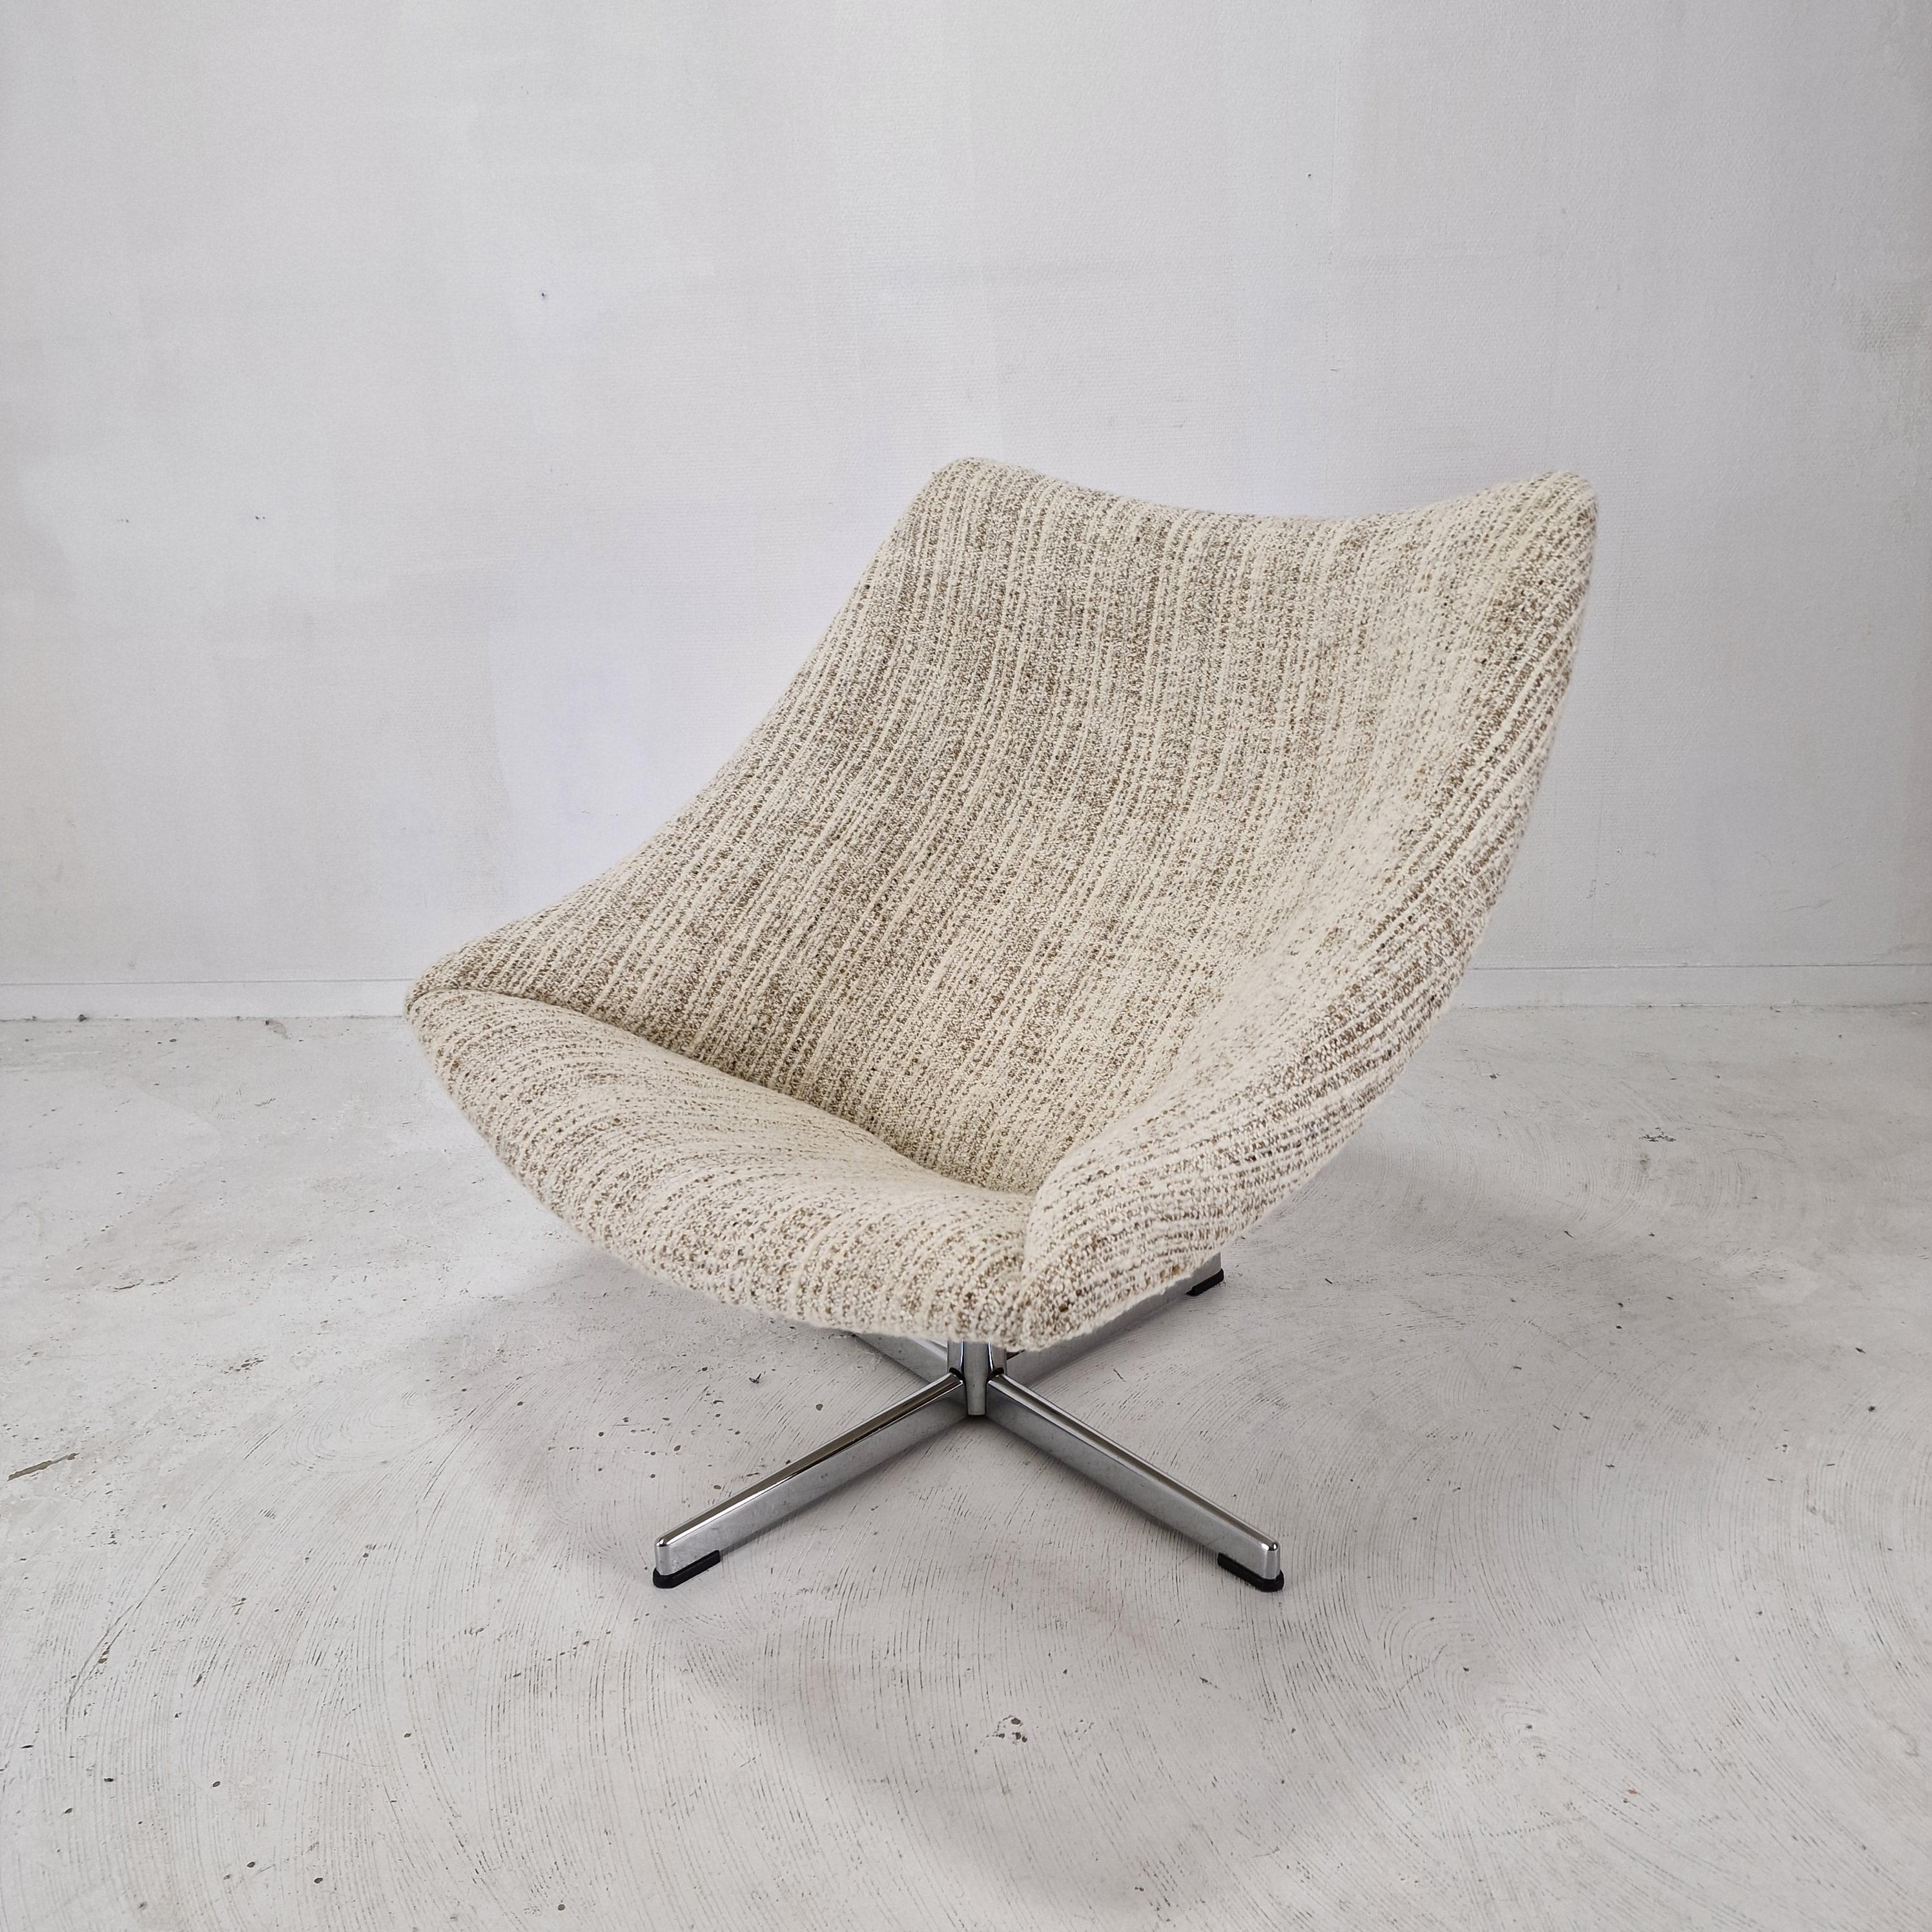 Dutch Oyster Chair with Cross Base by Pierre Paulin for Artifort, 1965